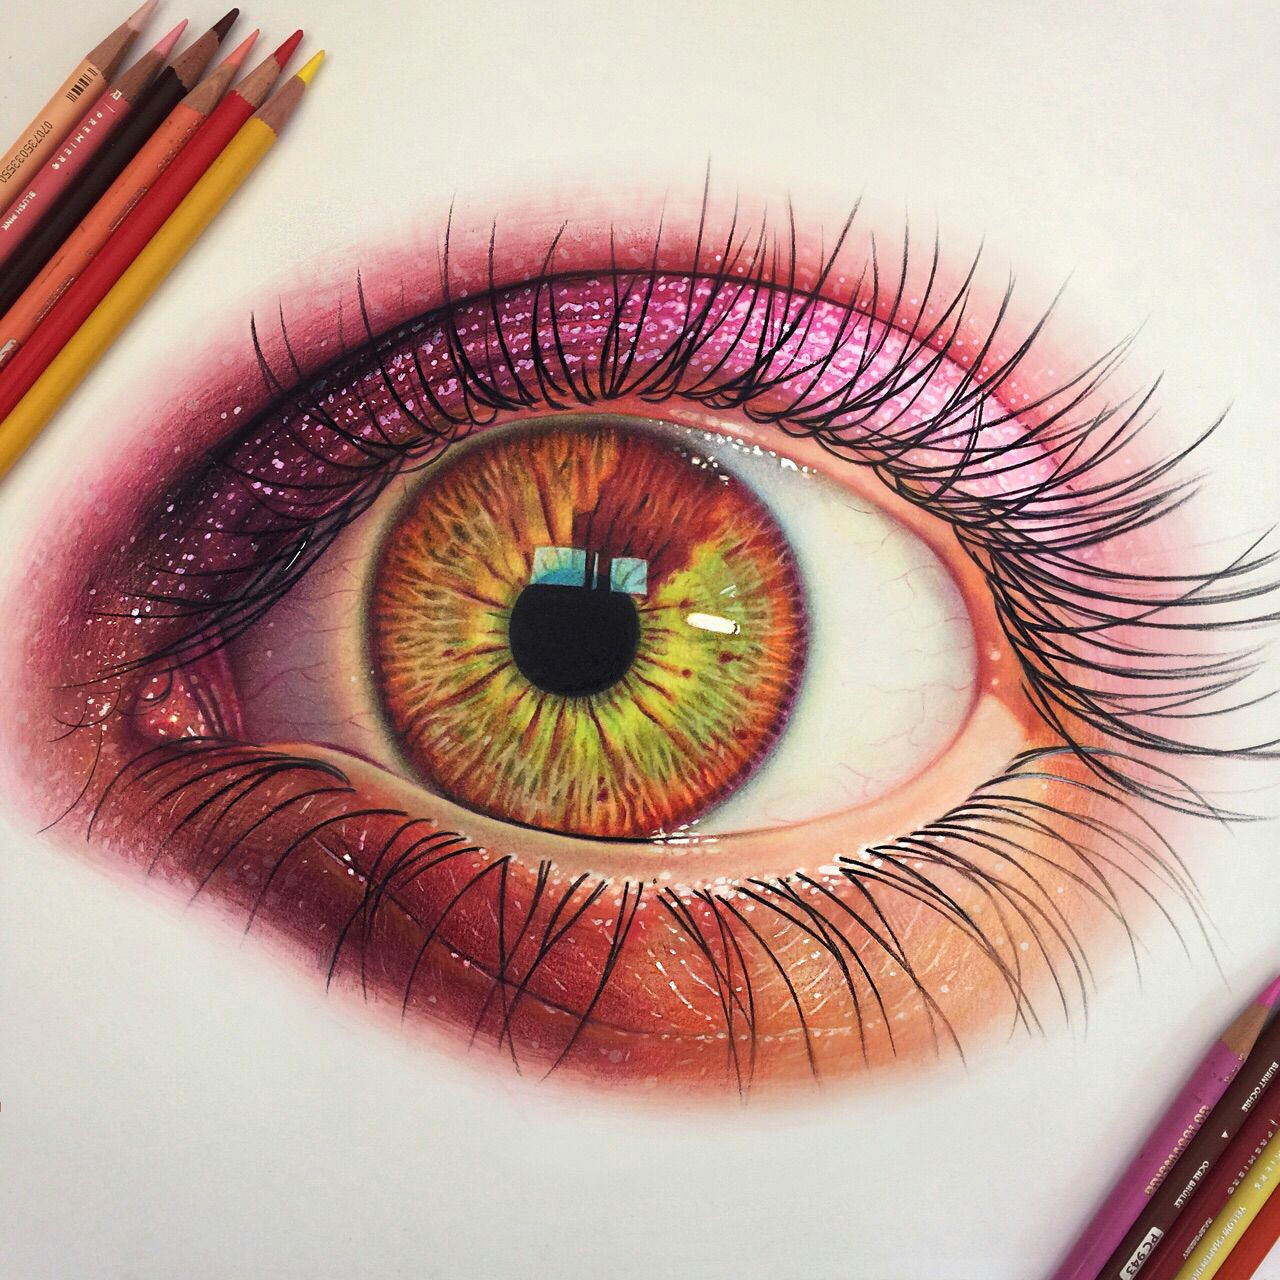 Drawing An Eye Realistically with Colored Pencils 25 Stunning and Realistic Color Pencil Drawings by Morgan Davidson